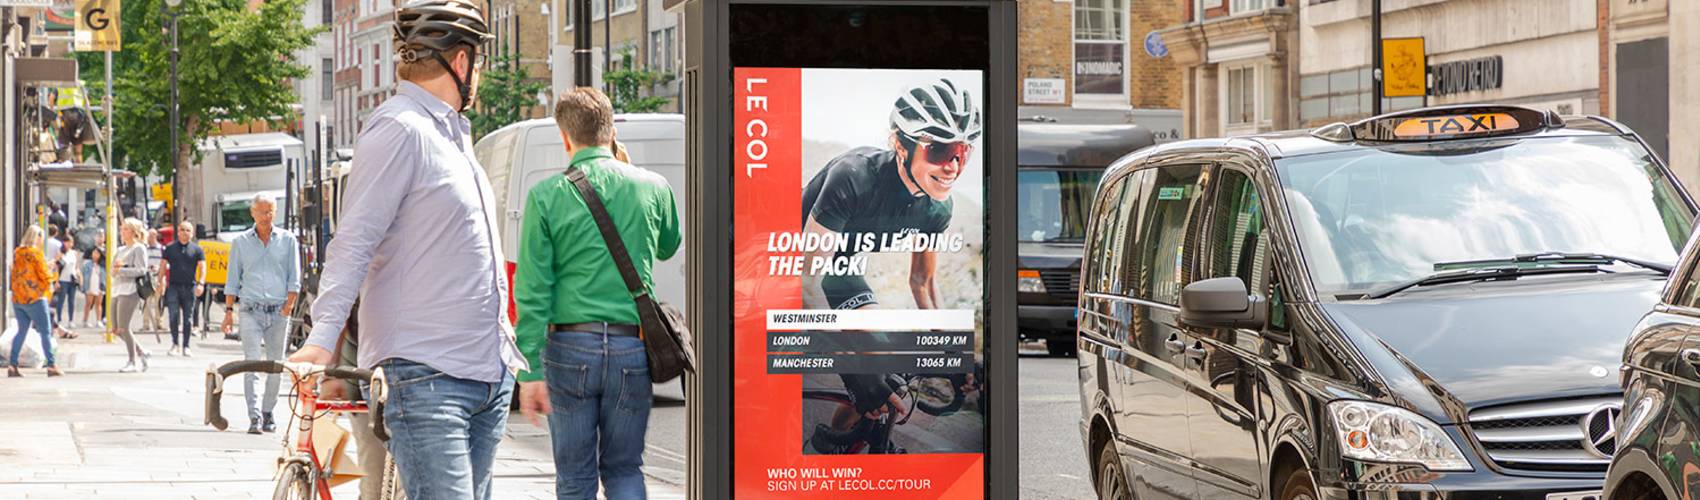 A cyclist on the pavement looking at a Le Col cycle campaign on an Adshel Live panel